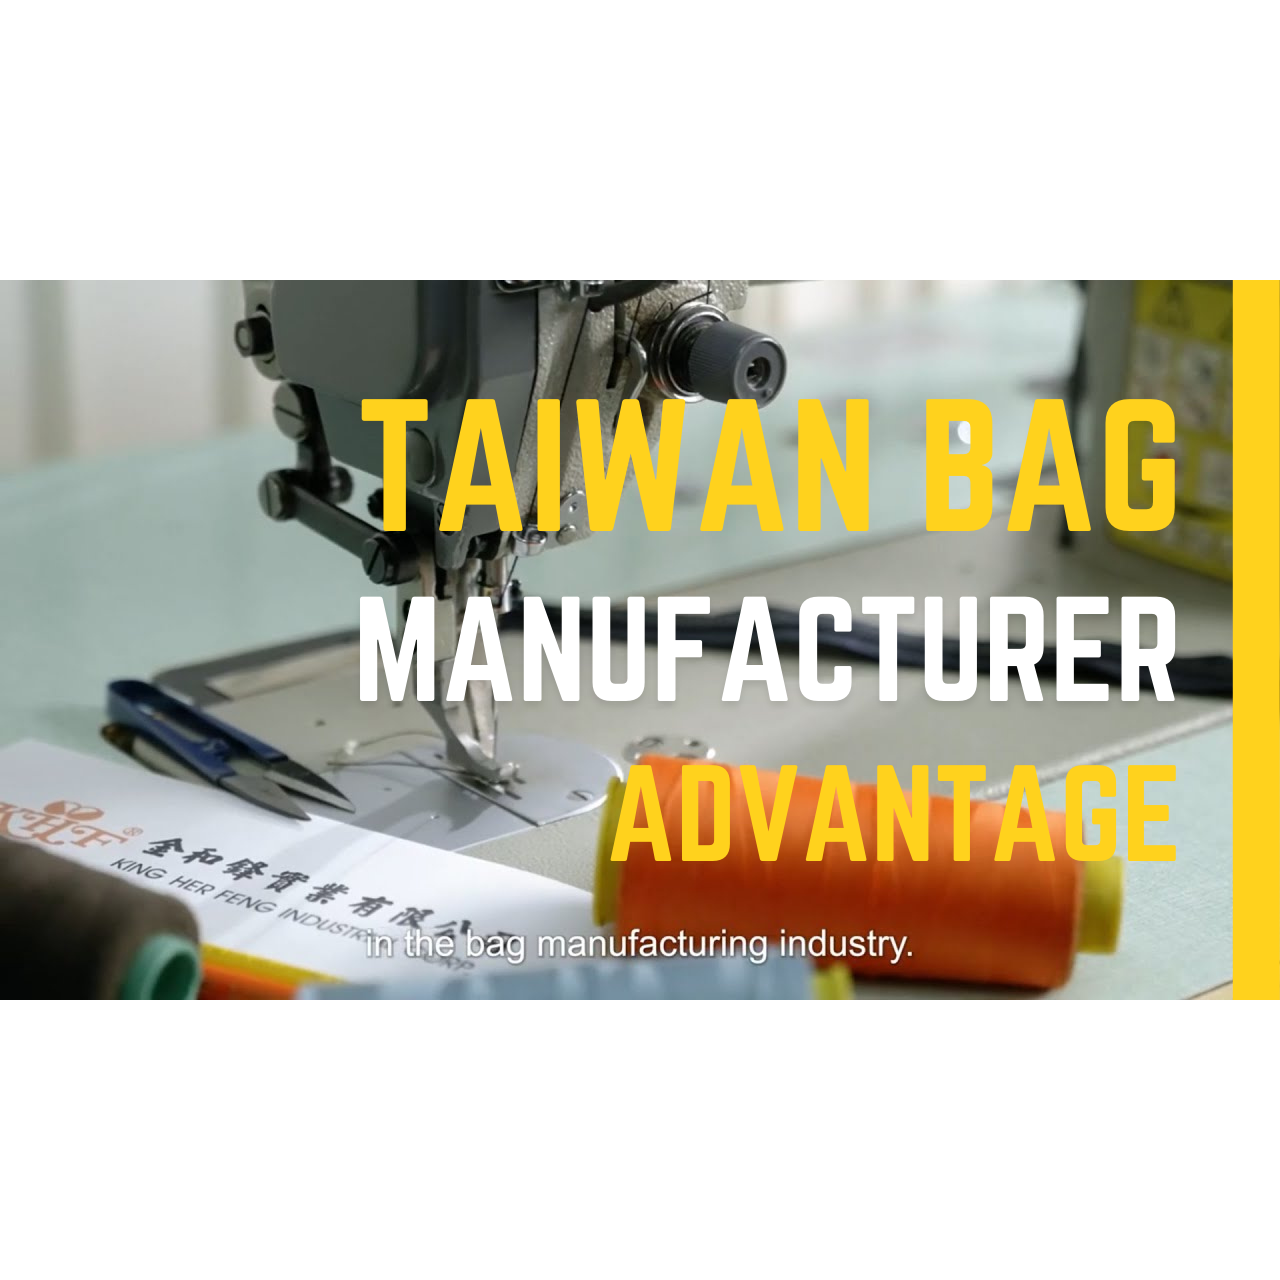 The Advantges of Taiwan Custom Bag Manufacturer & Supplier